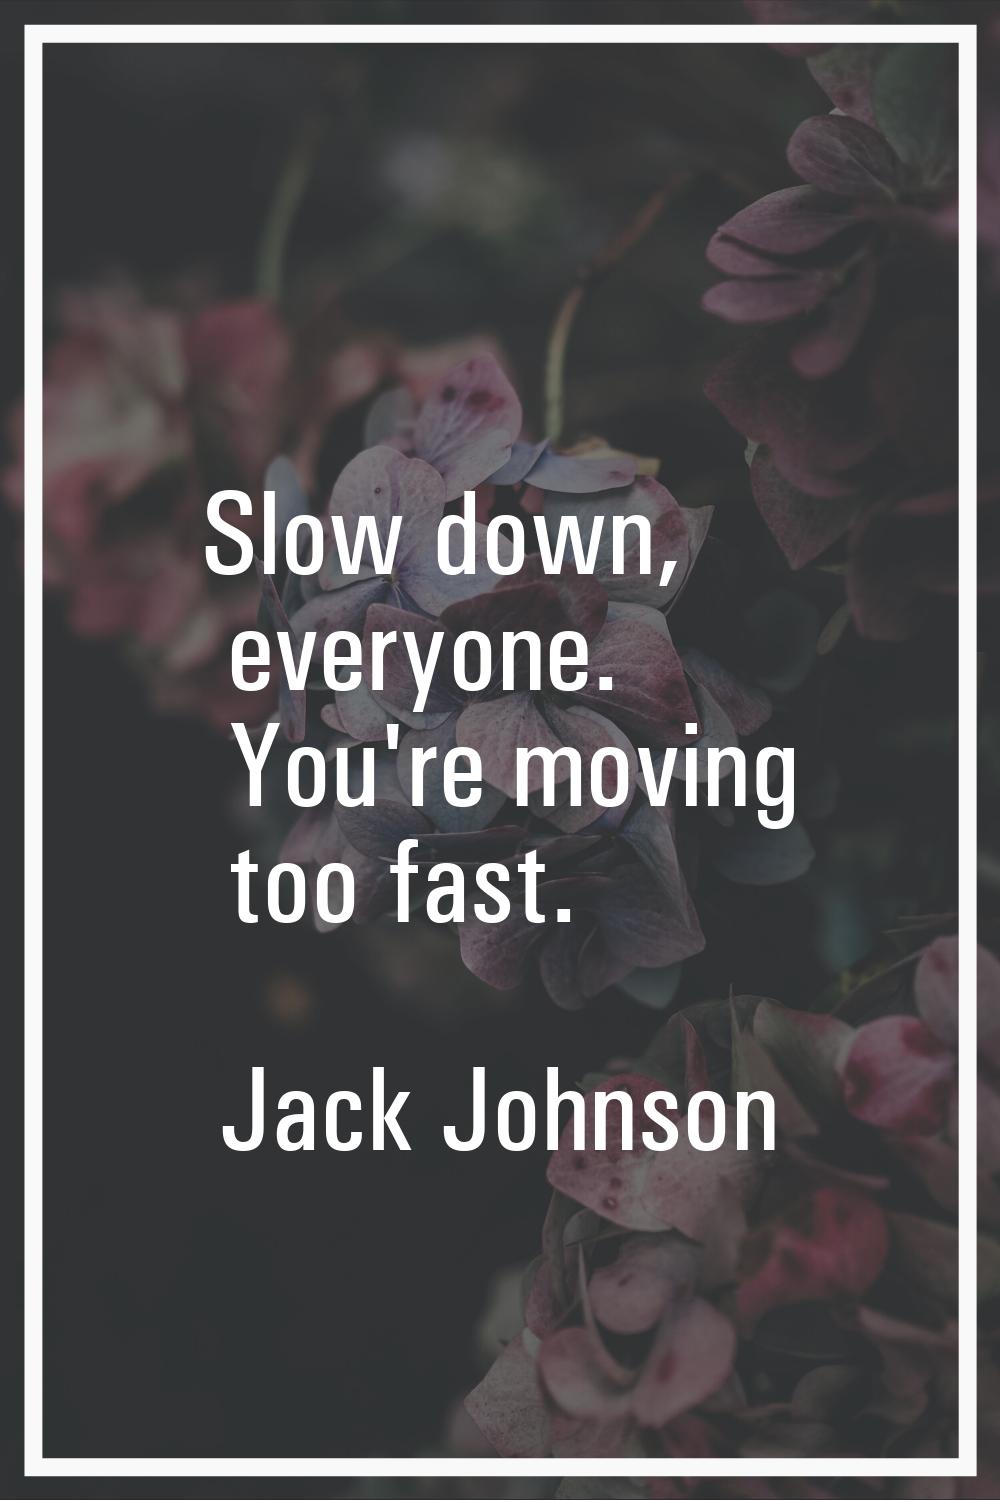 Slow down, everyone. You're moving too fast.